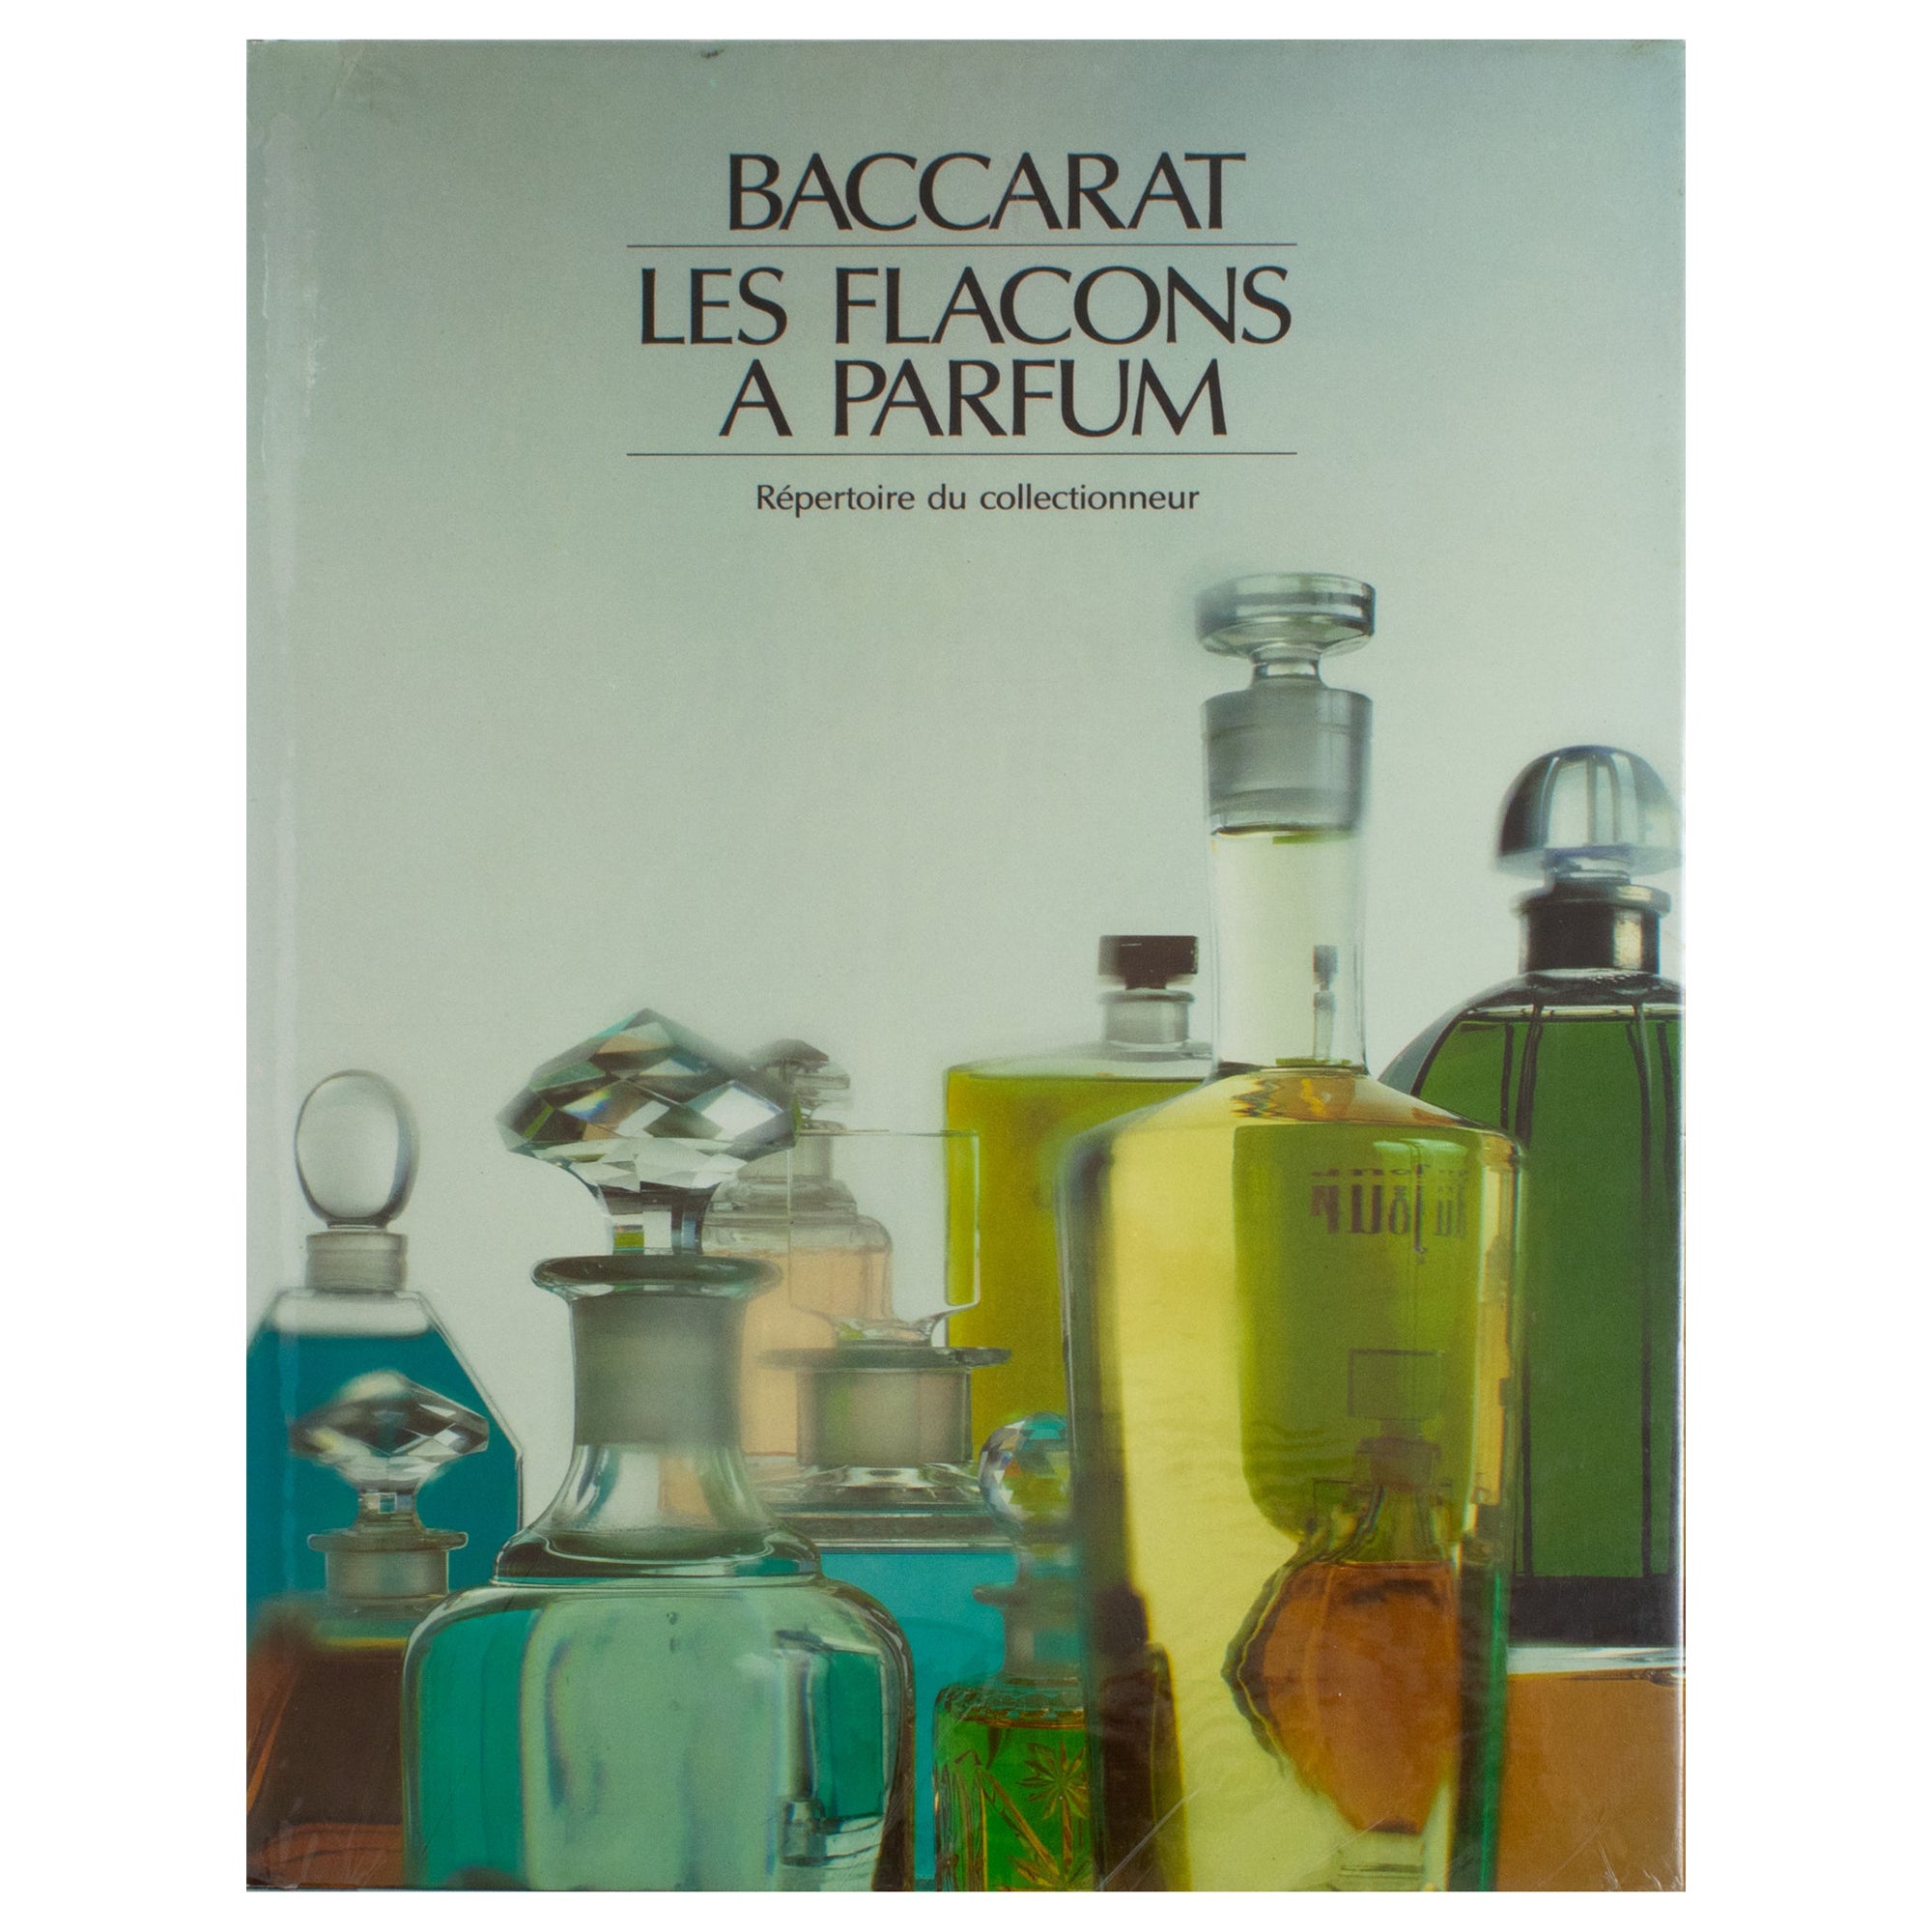 Baccarat, The Perfume Bottles, French Book by Cristallerie de Baccarat, 1986 For Sale